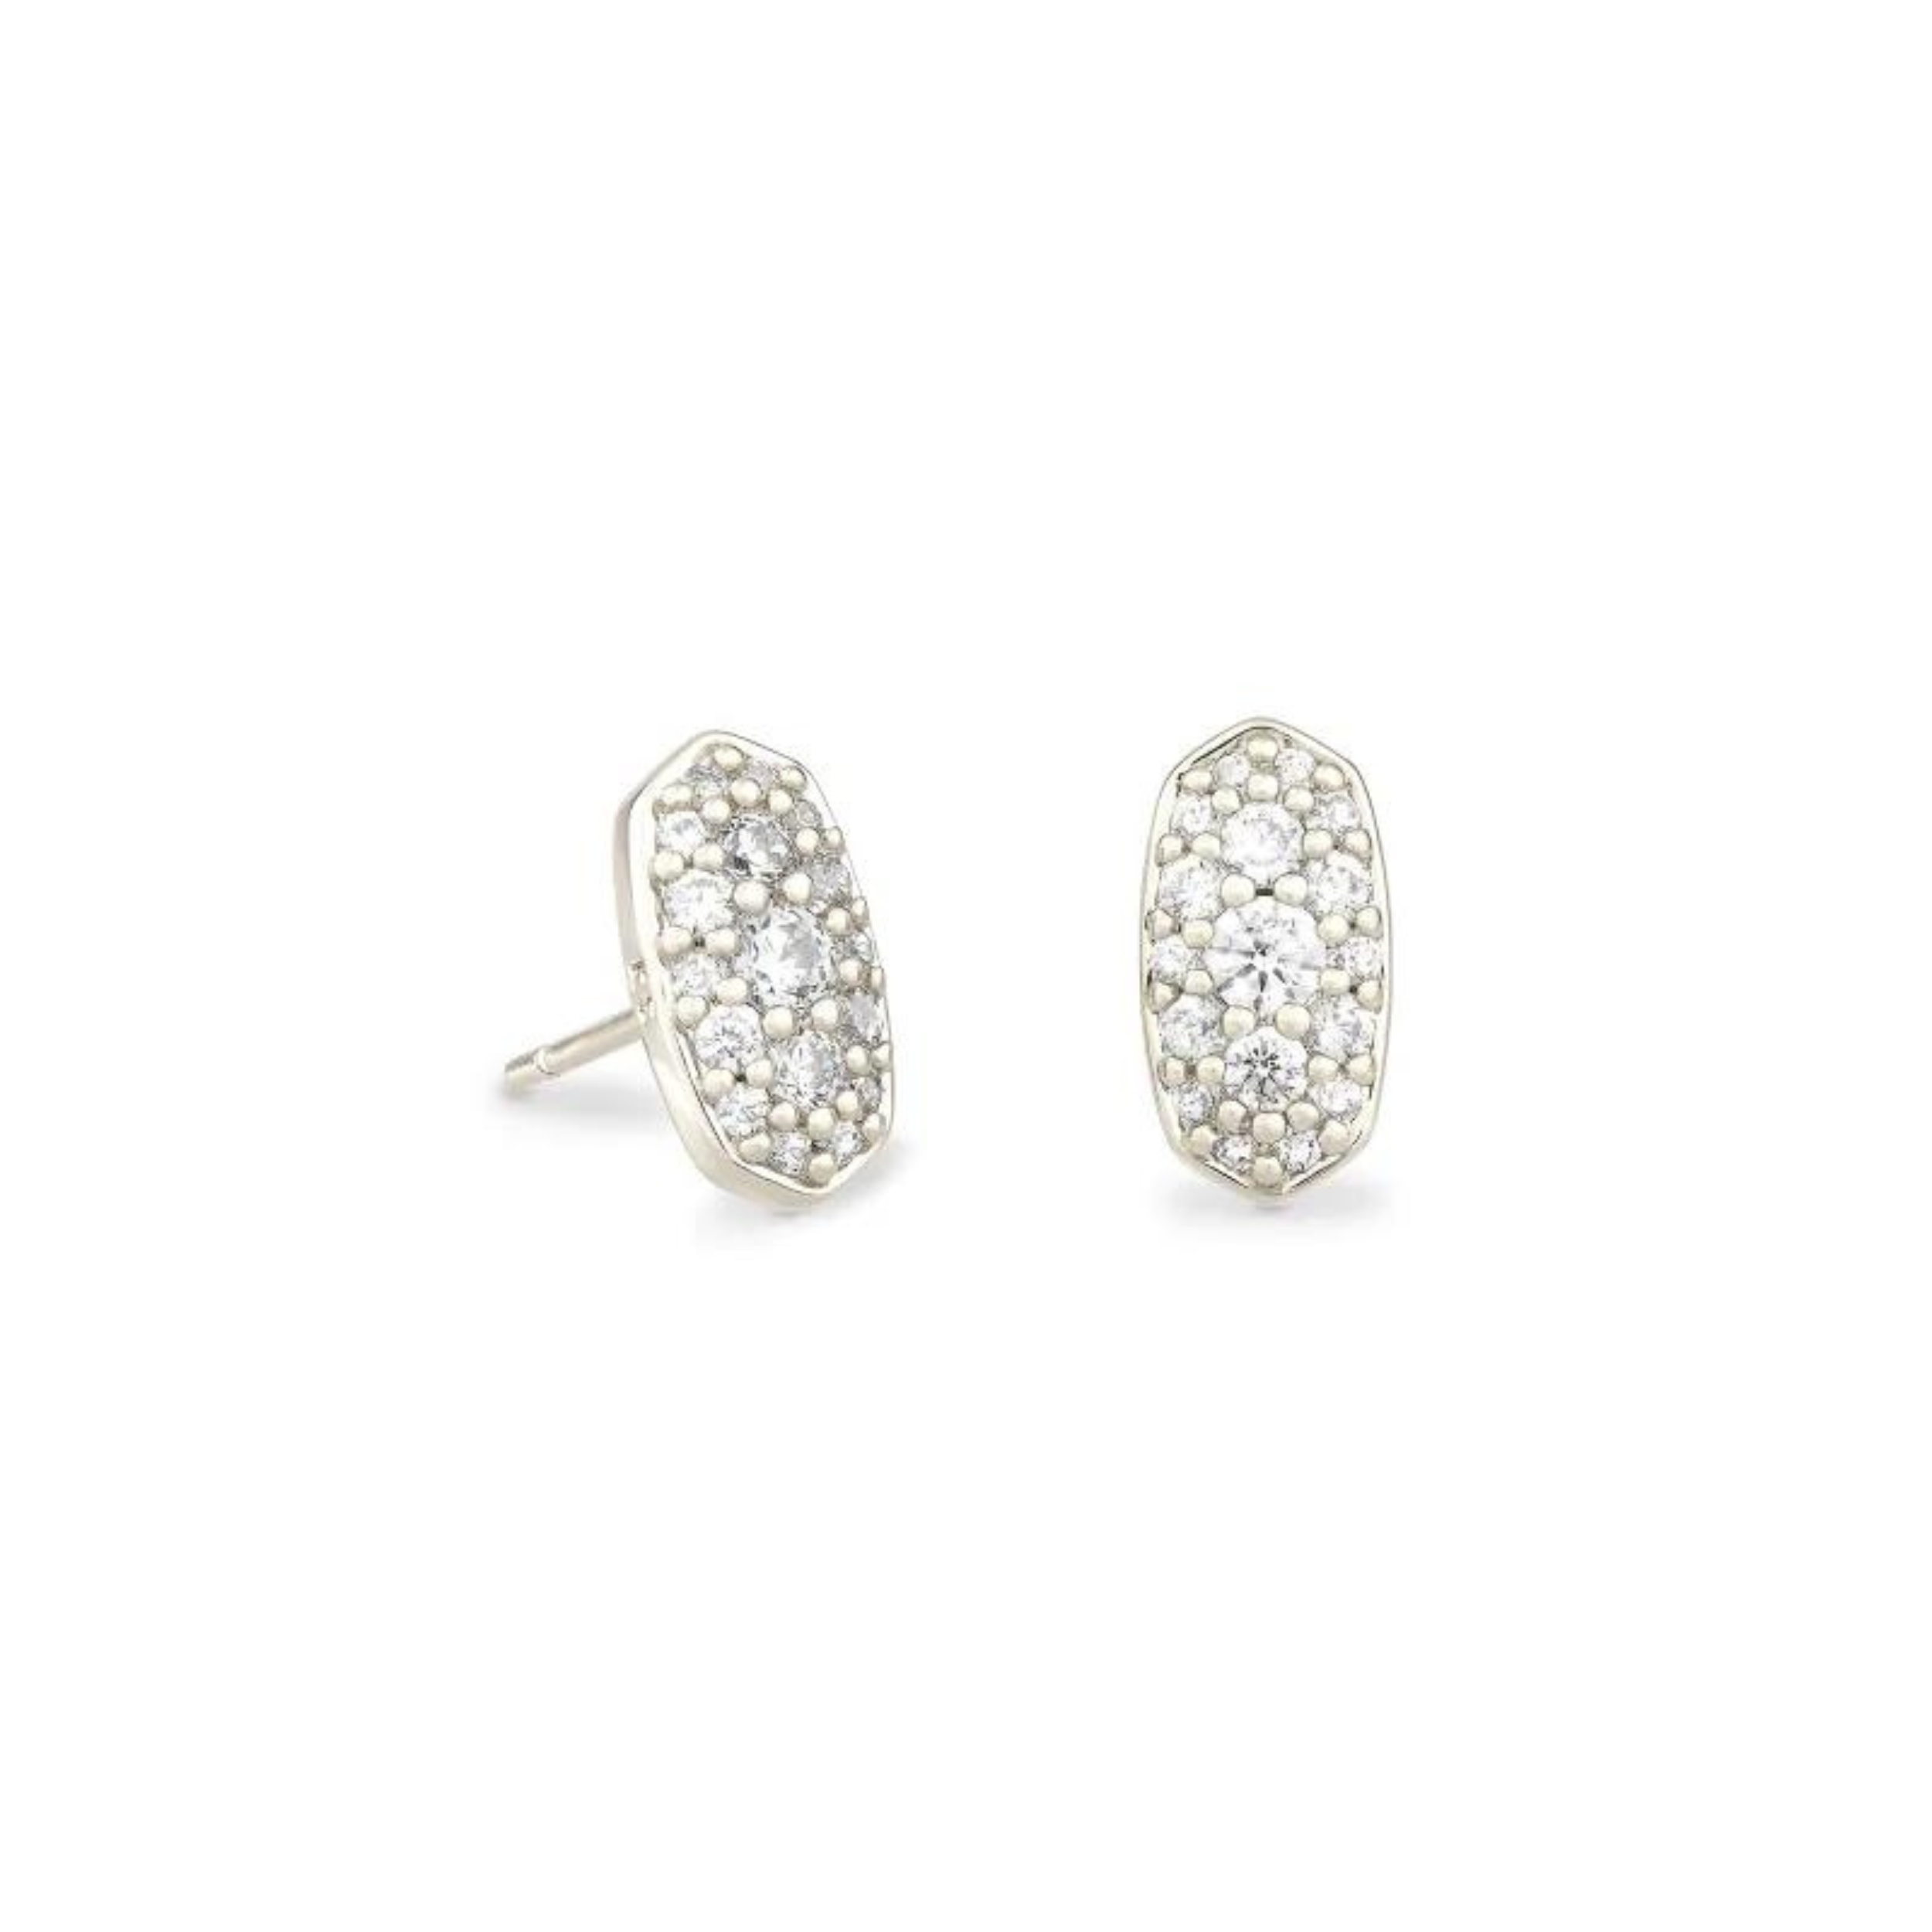 Kendra Scott | Grayson Silver Stud Earrings in White Crystal - Giddy Up Glamour Boutique